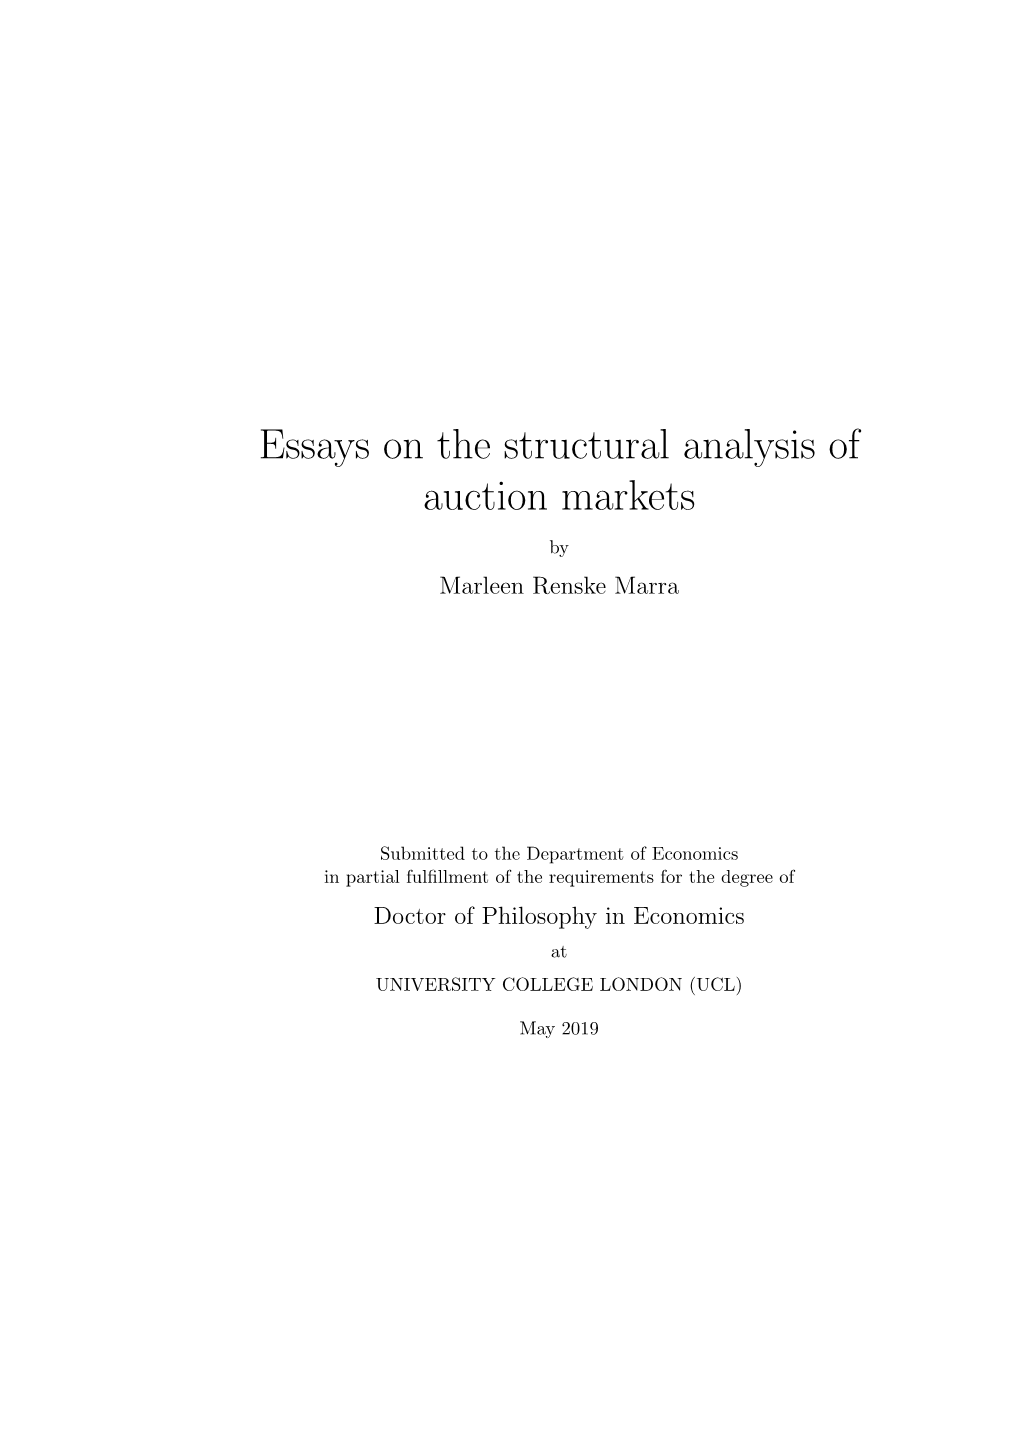 Essays on the Structural Analysis of Auction Markets